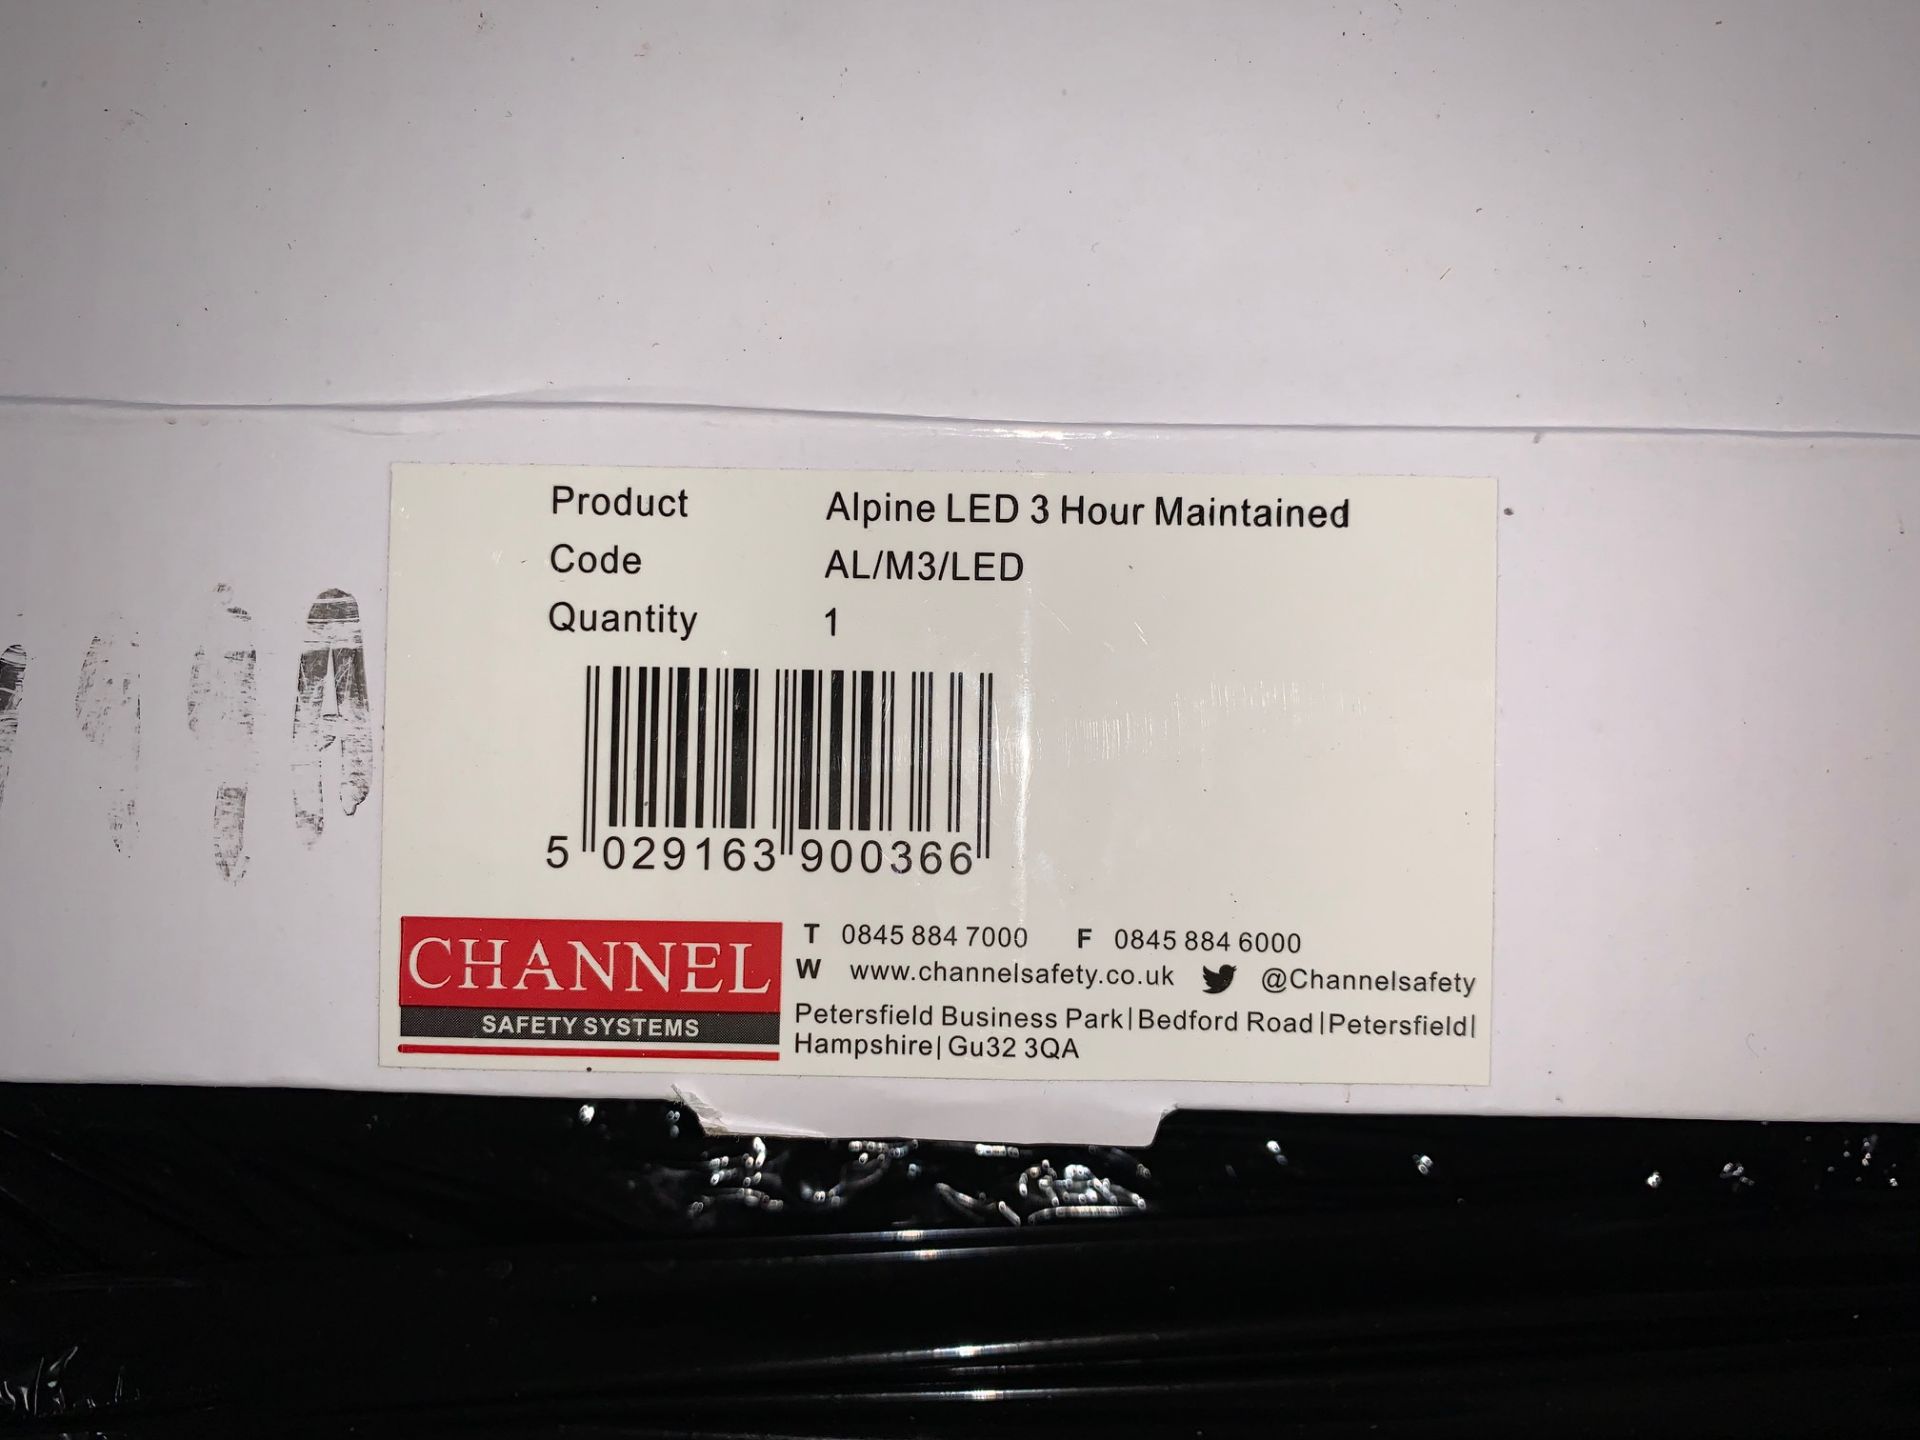 Channel Safety Alpine LED Fire Exit Sign Emergency Light - Product Code AL/M3/LED - Image 3 of 3